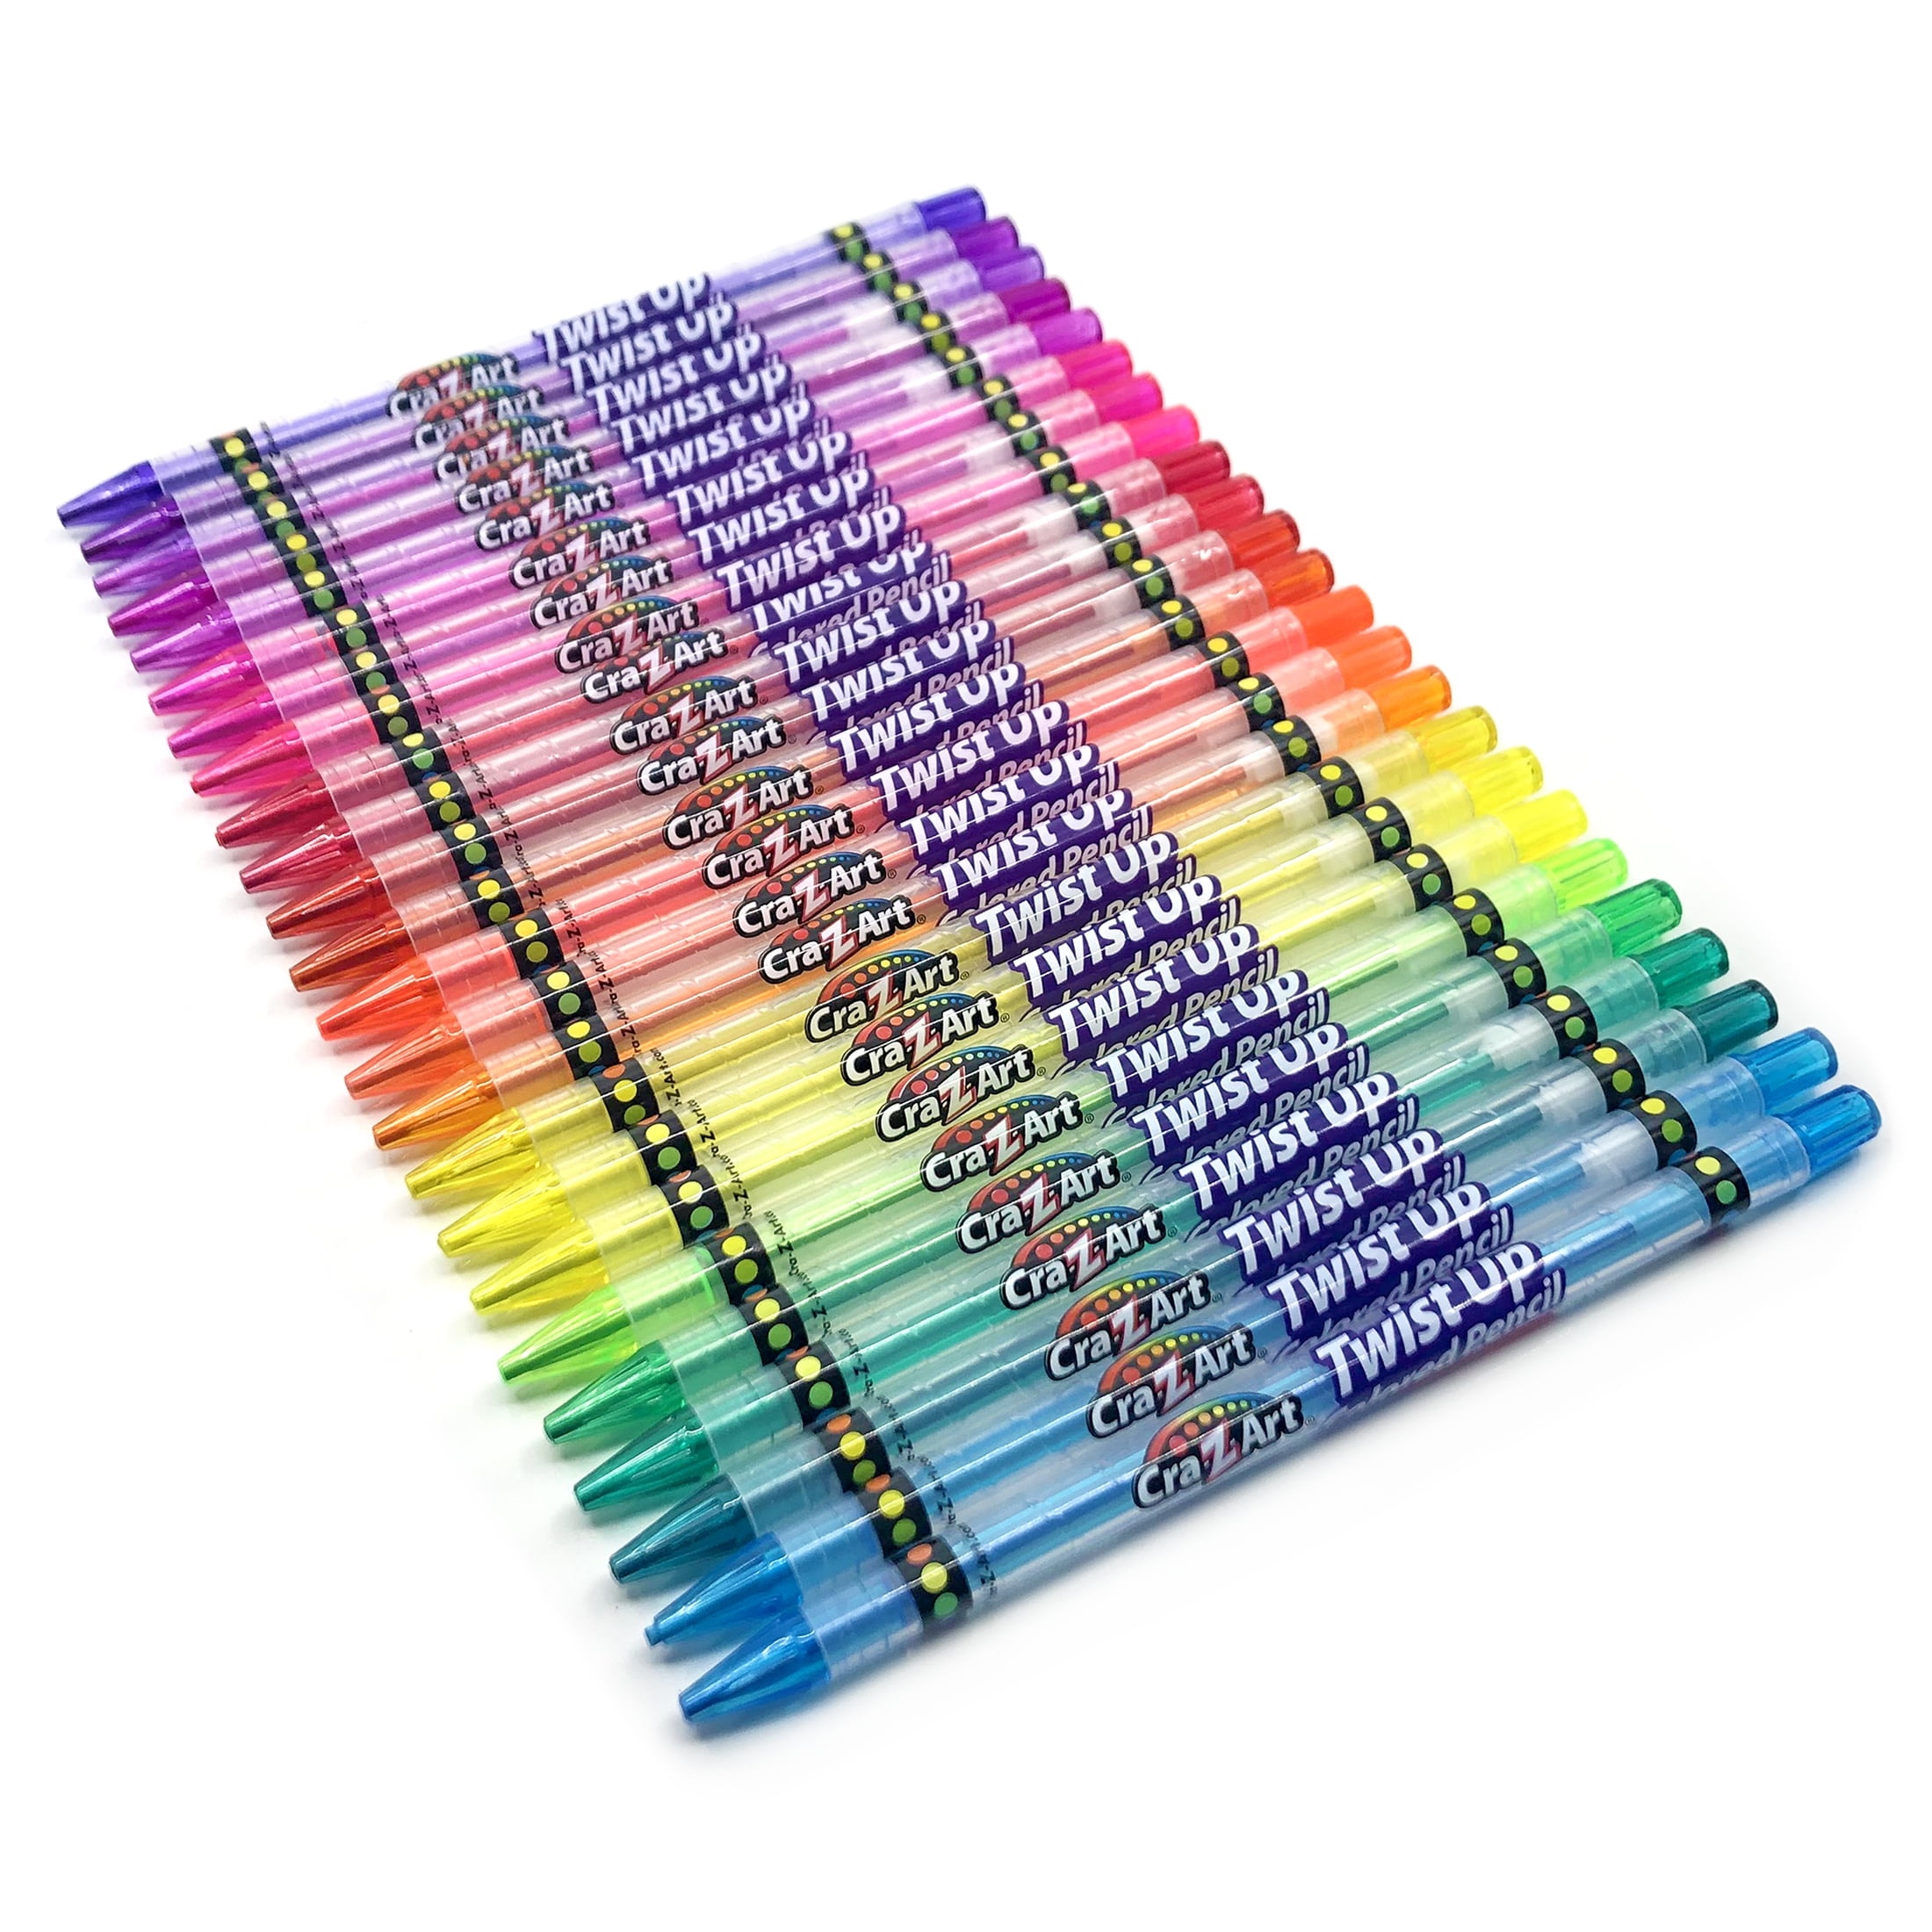 50 Colors in Motion Twist up Crayons Colored Pencils Kids Crayon Adult  Coloring for sale online